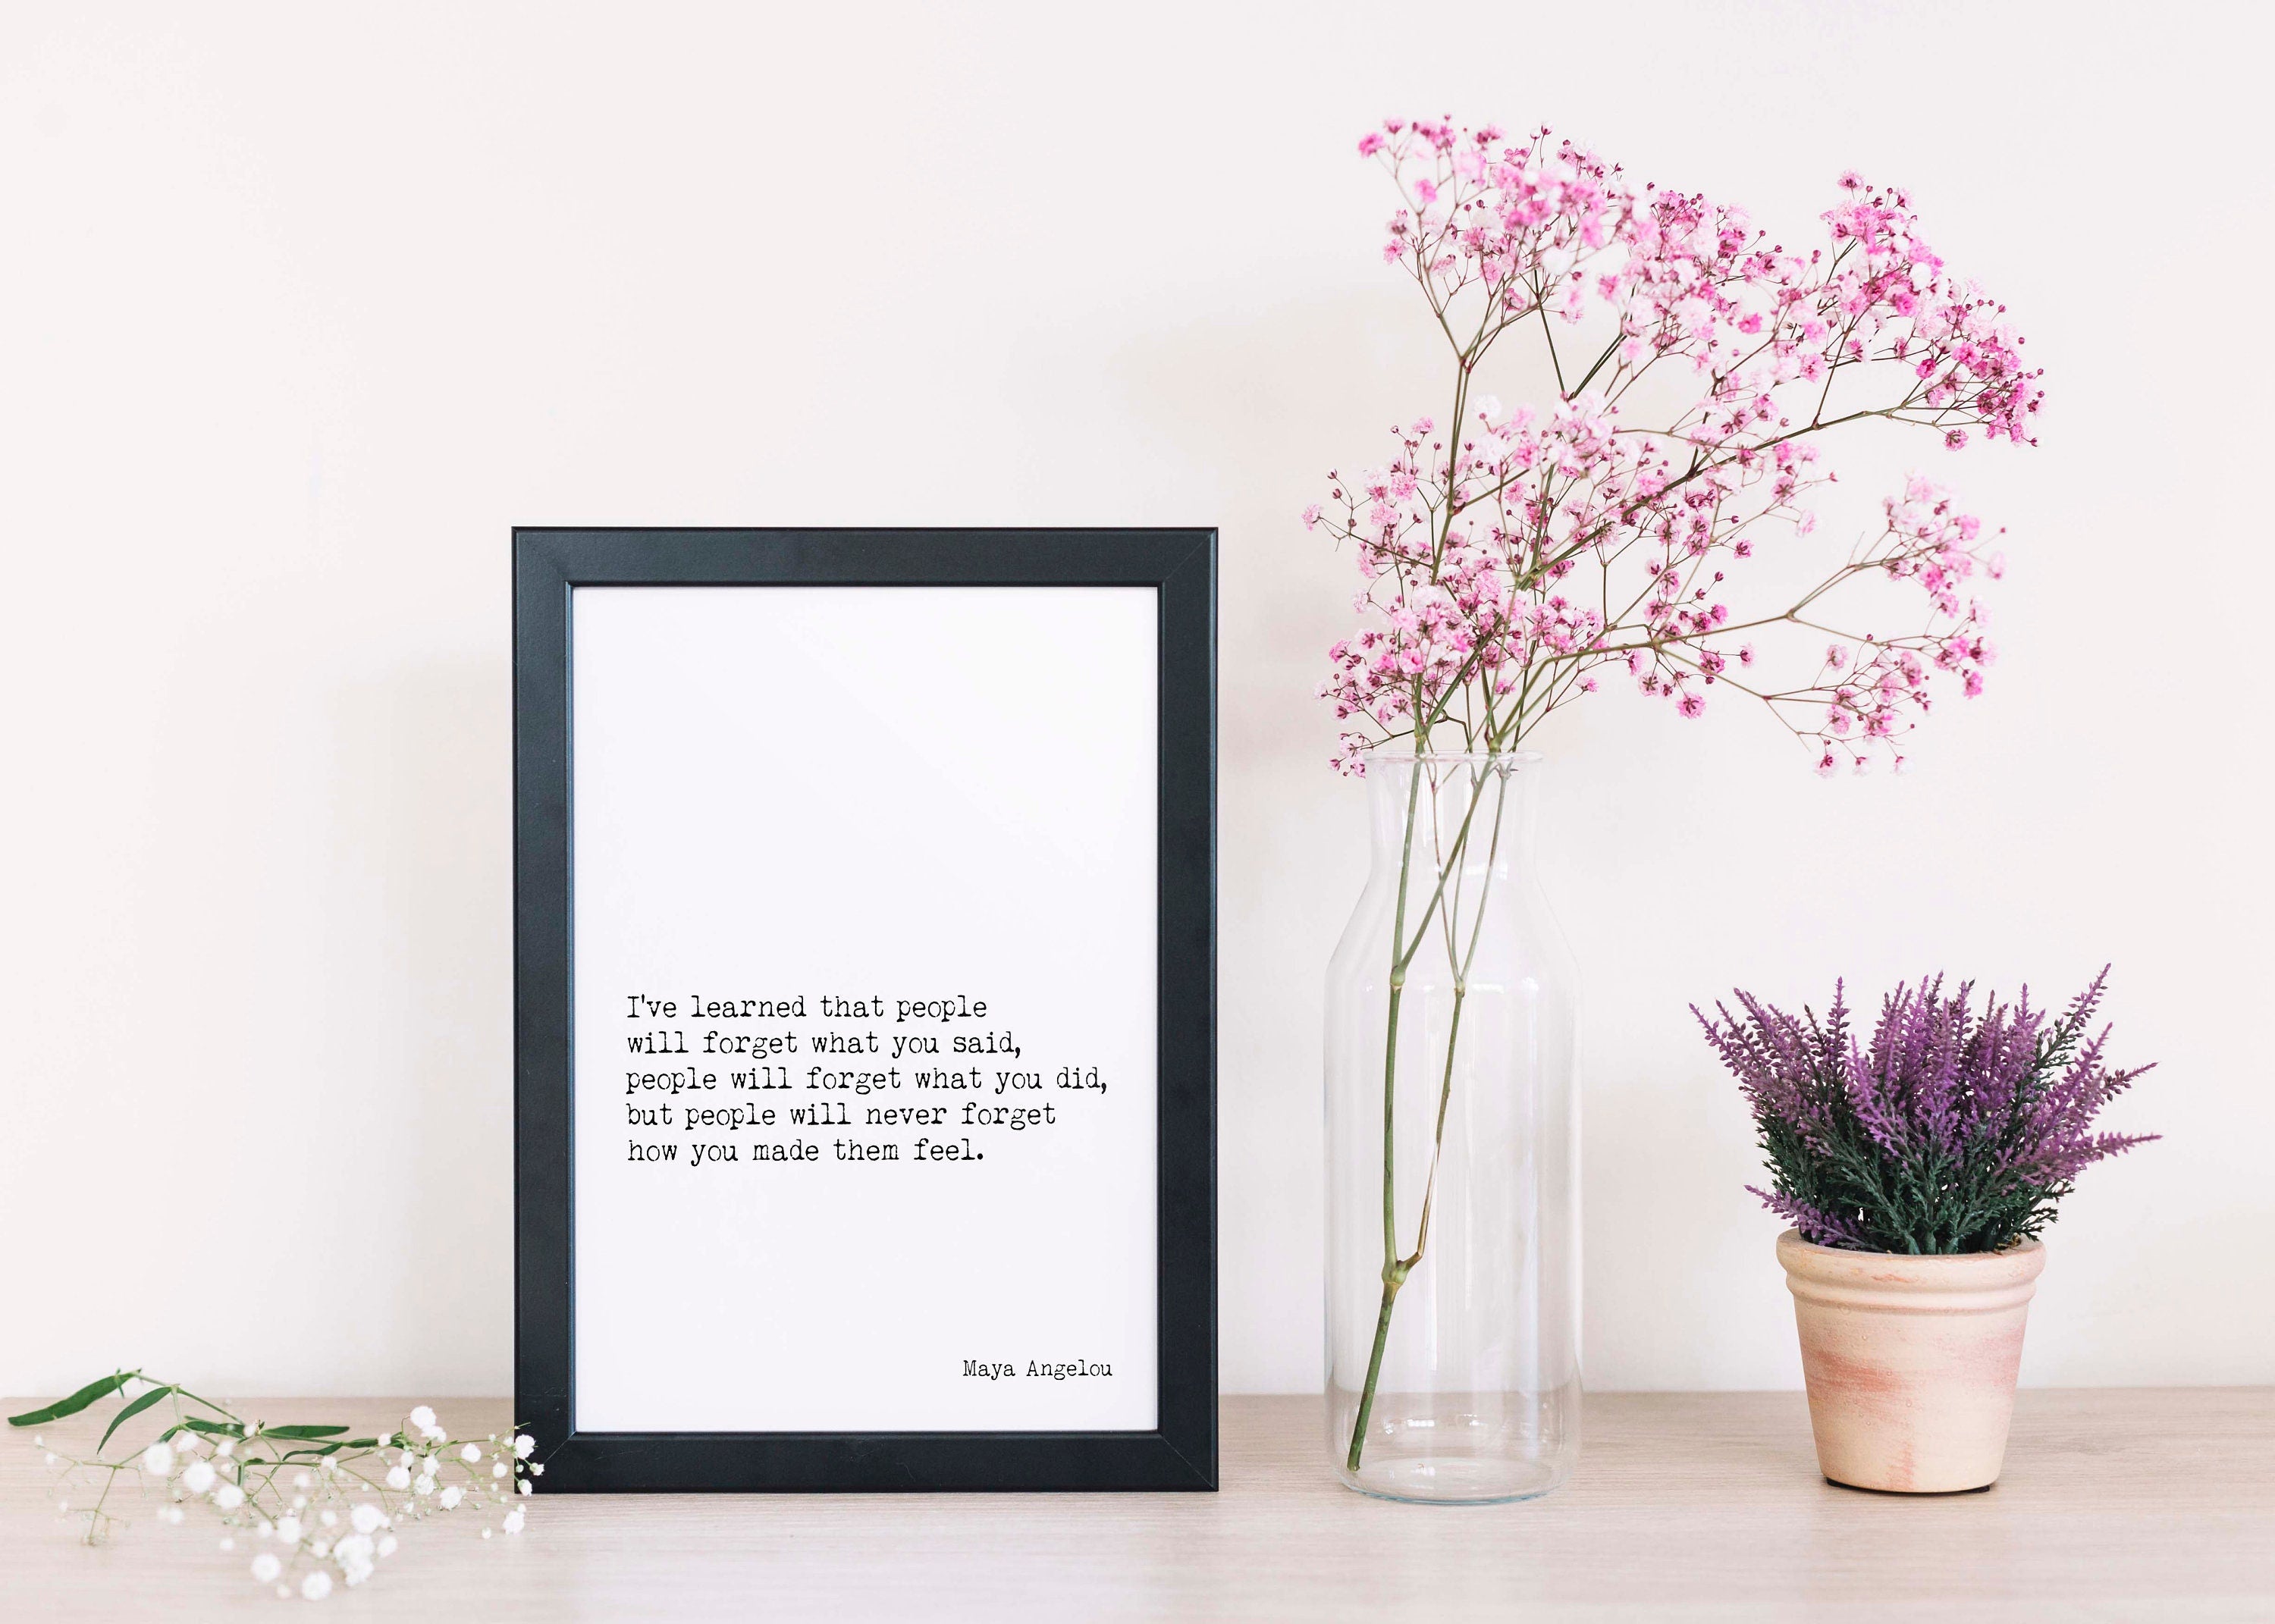 Maya Angelou I've Learned Inspirational Quote Minimalist Art, People Will Remember How You Made Them Feel - Framed and Unframed Options